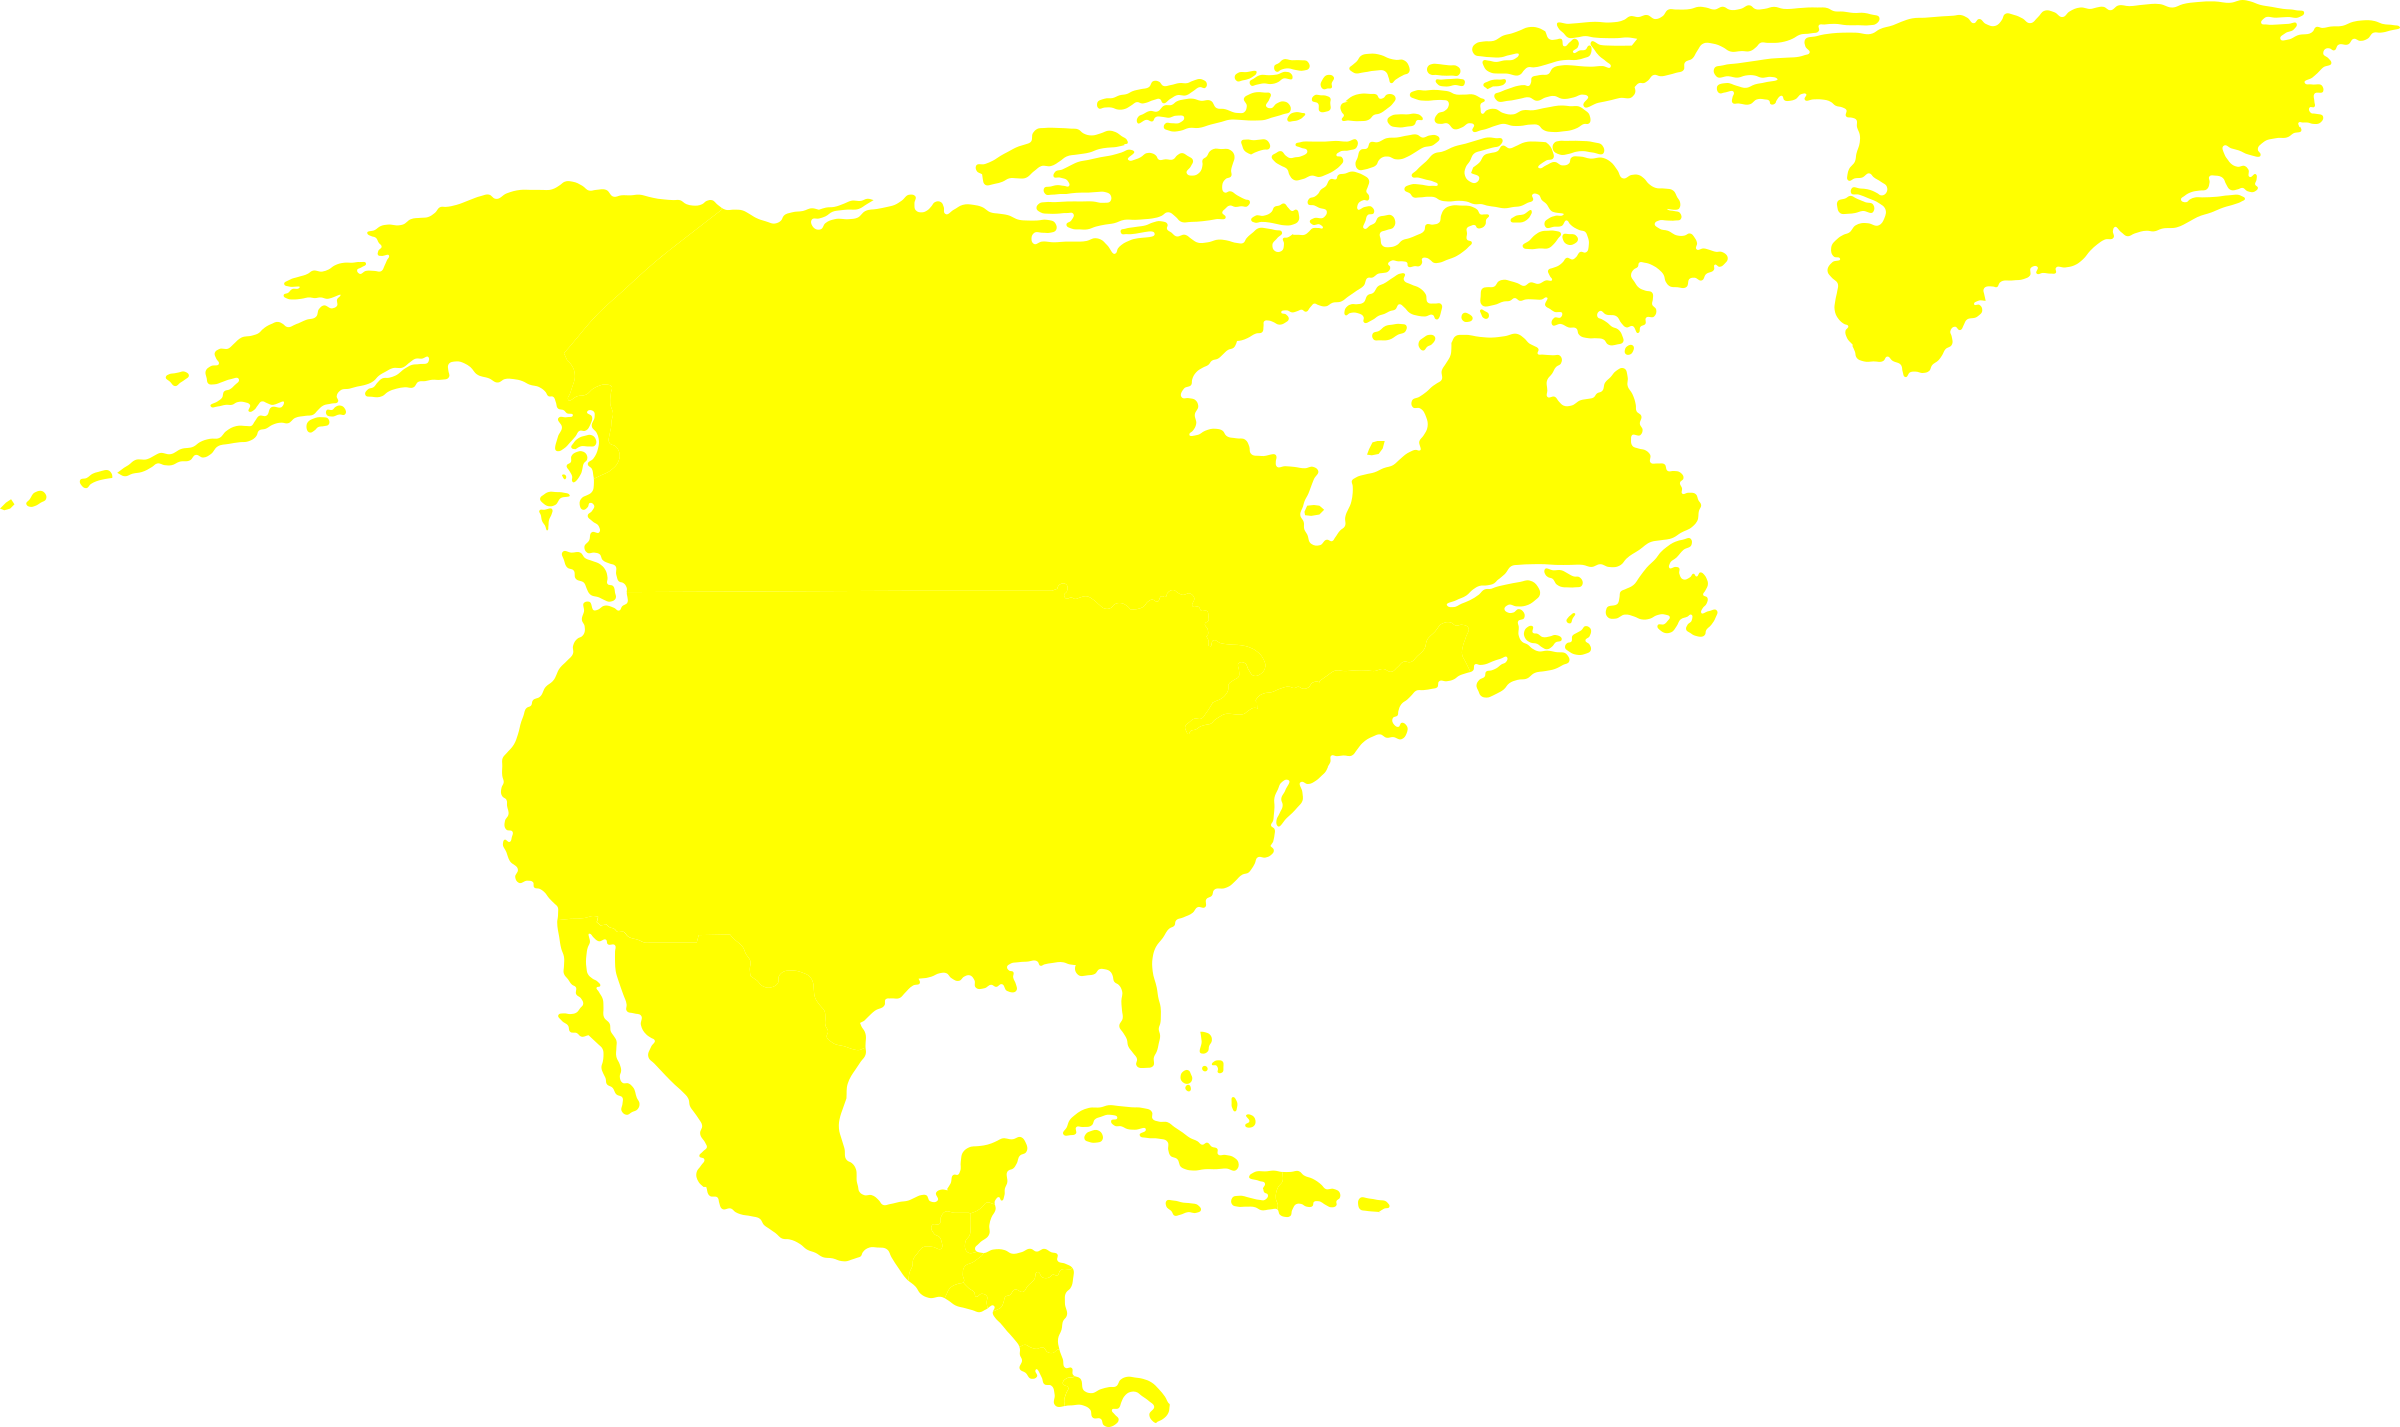 North American Continent By Iyo